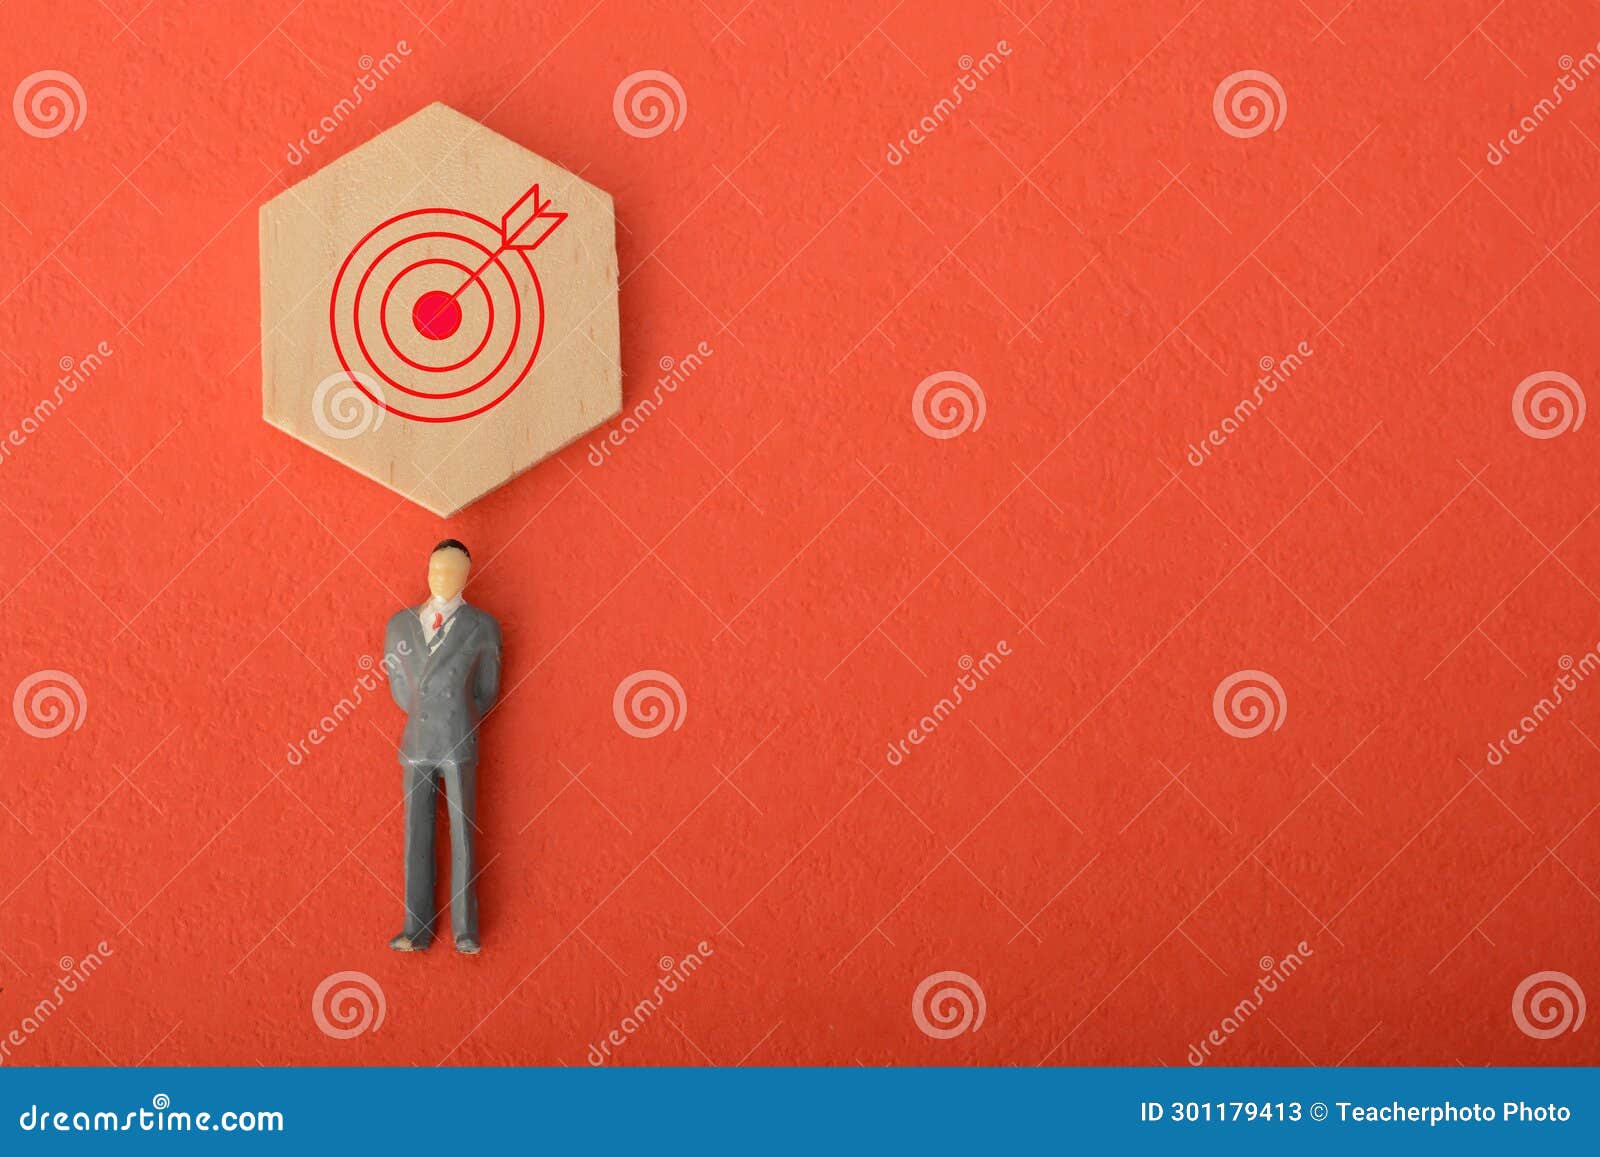 employing a creative approach, such as utilizing a hand-held target board, aids in setting precise business objectives and